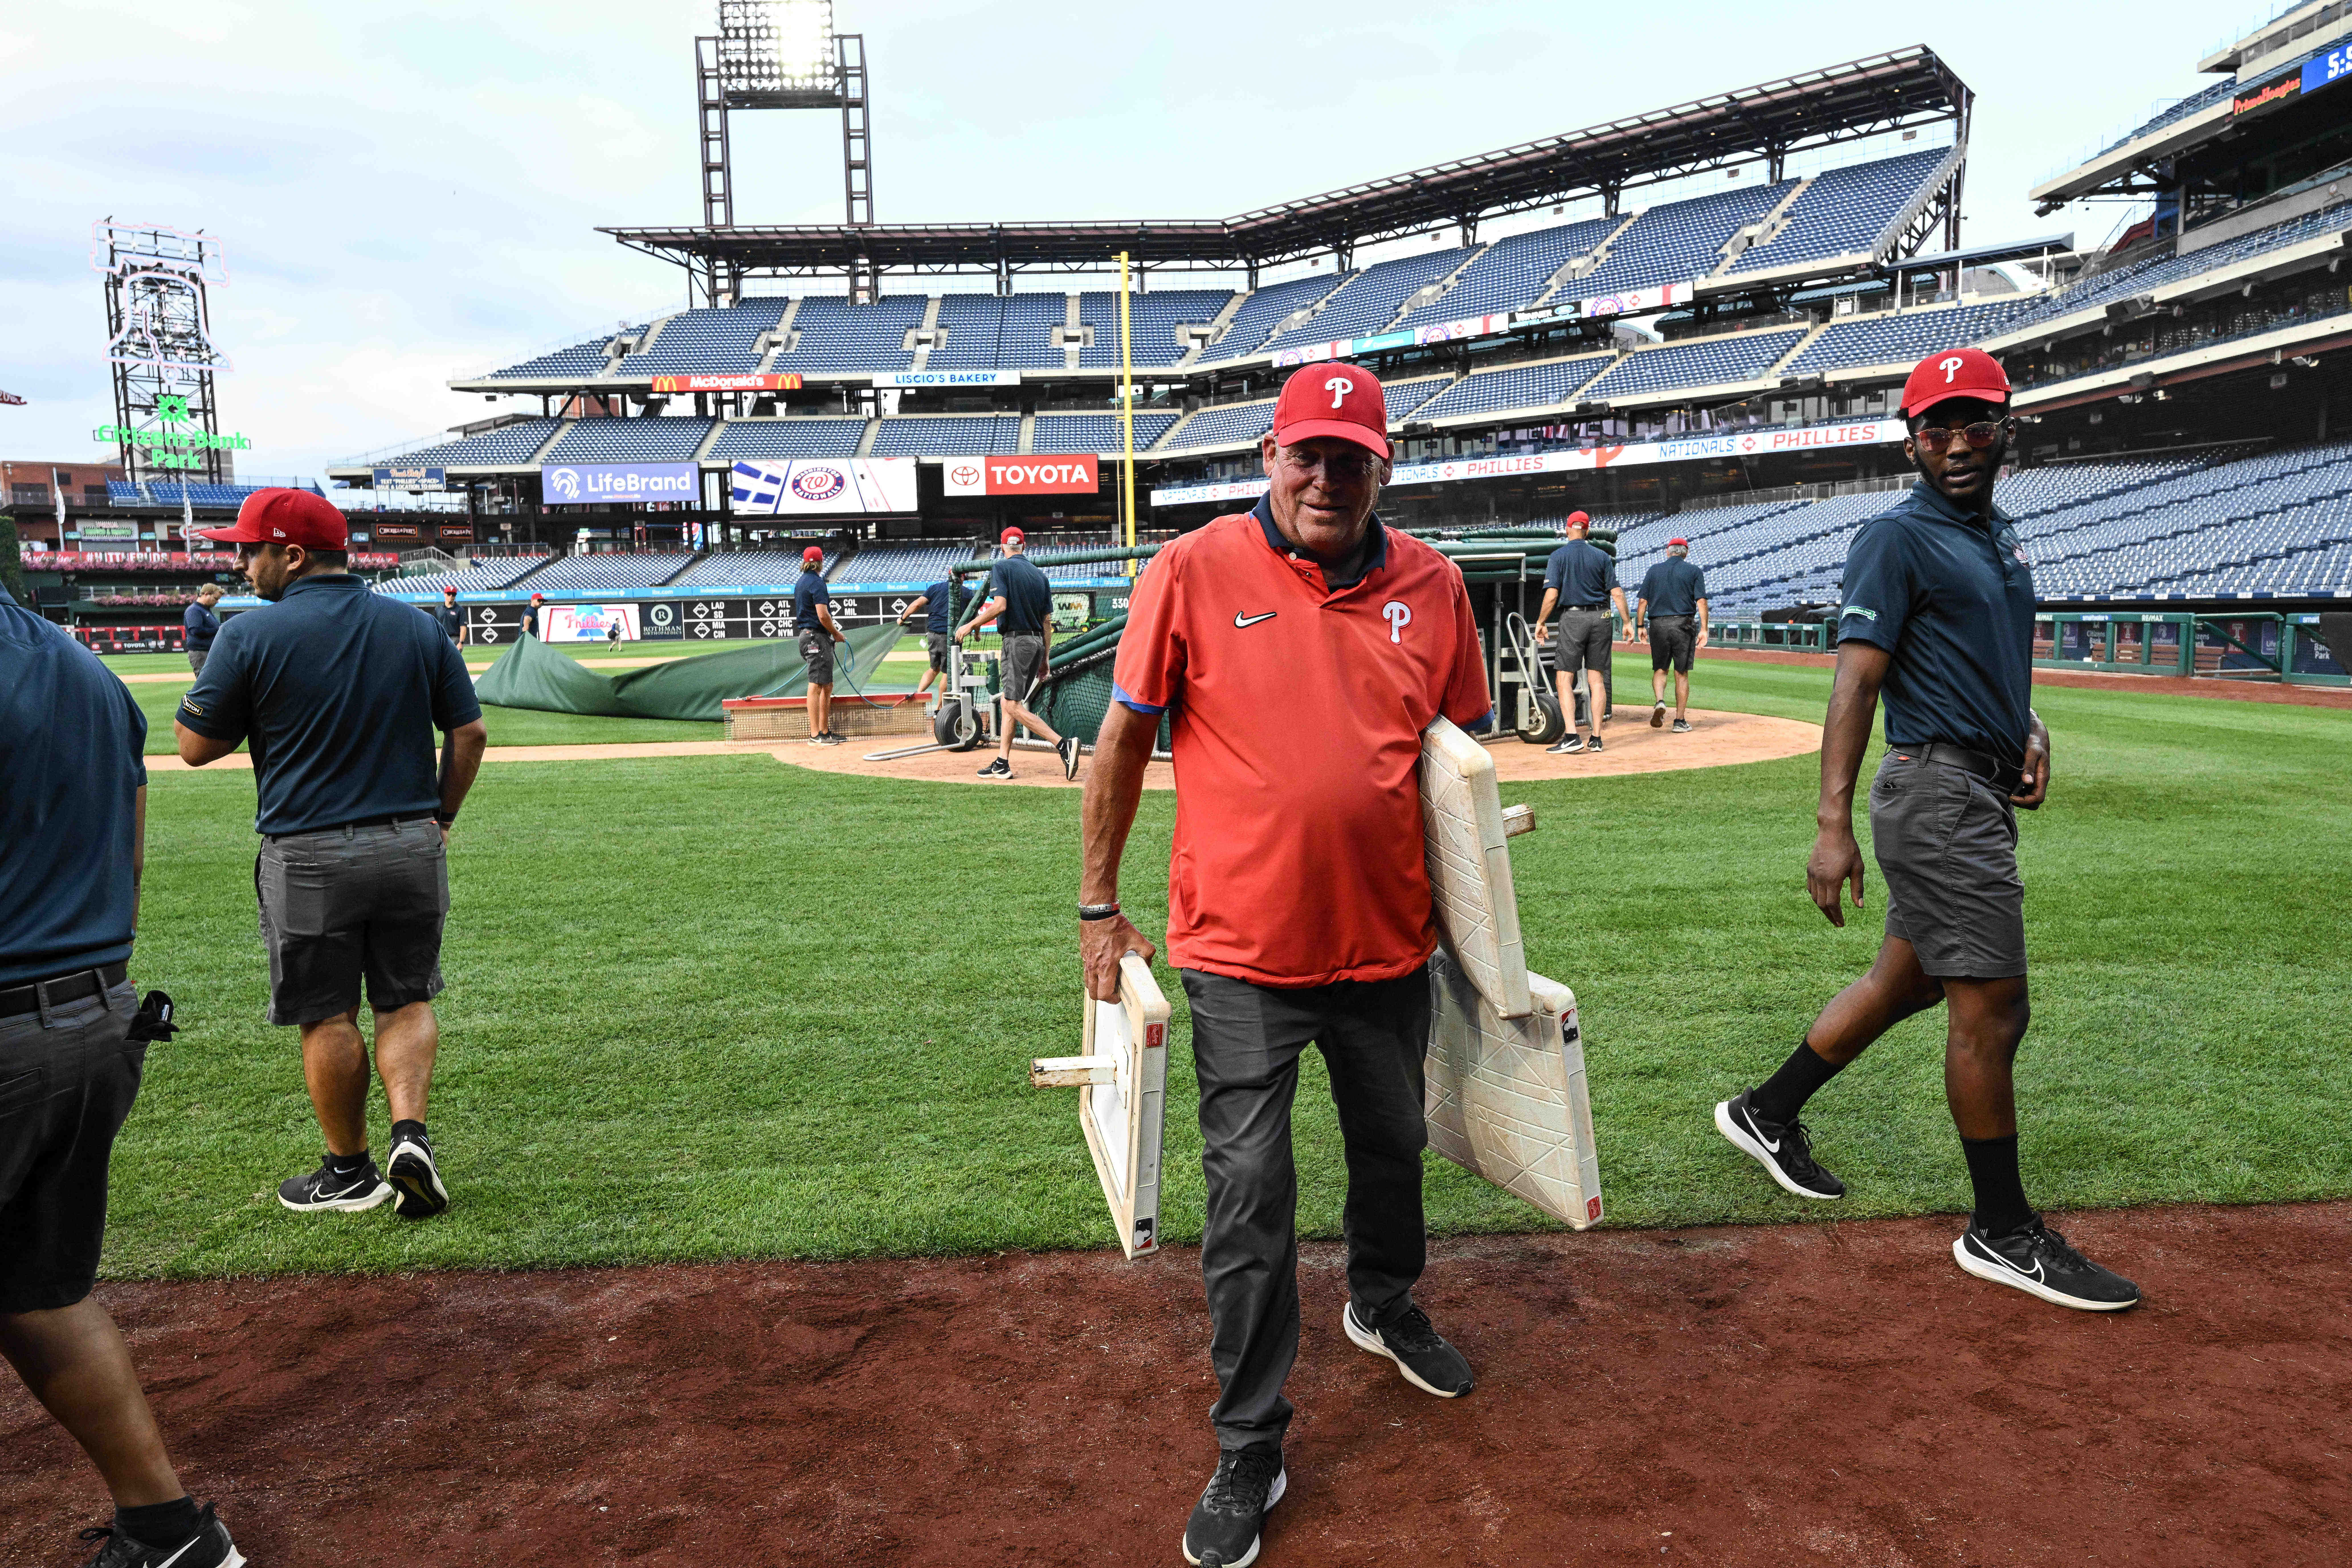 Phillies-Nationals postponed Monday, double-header slated for Tuesday